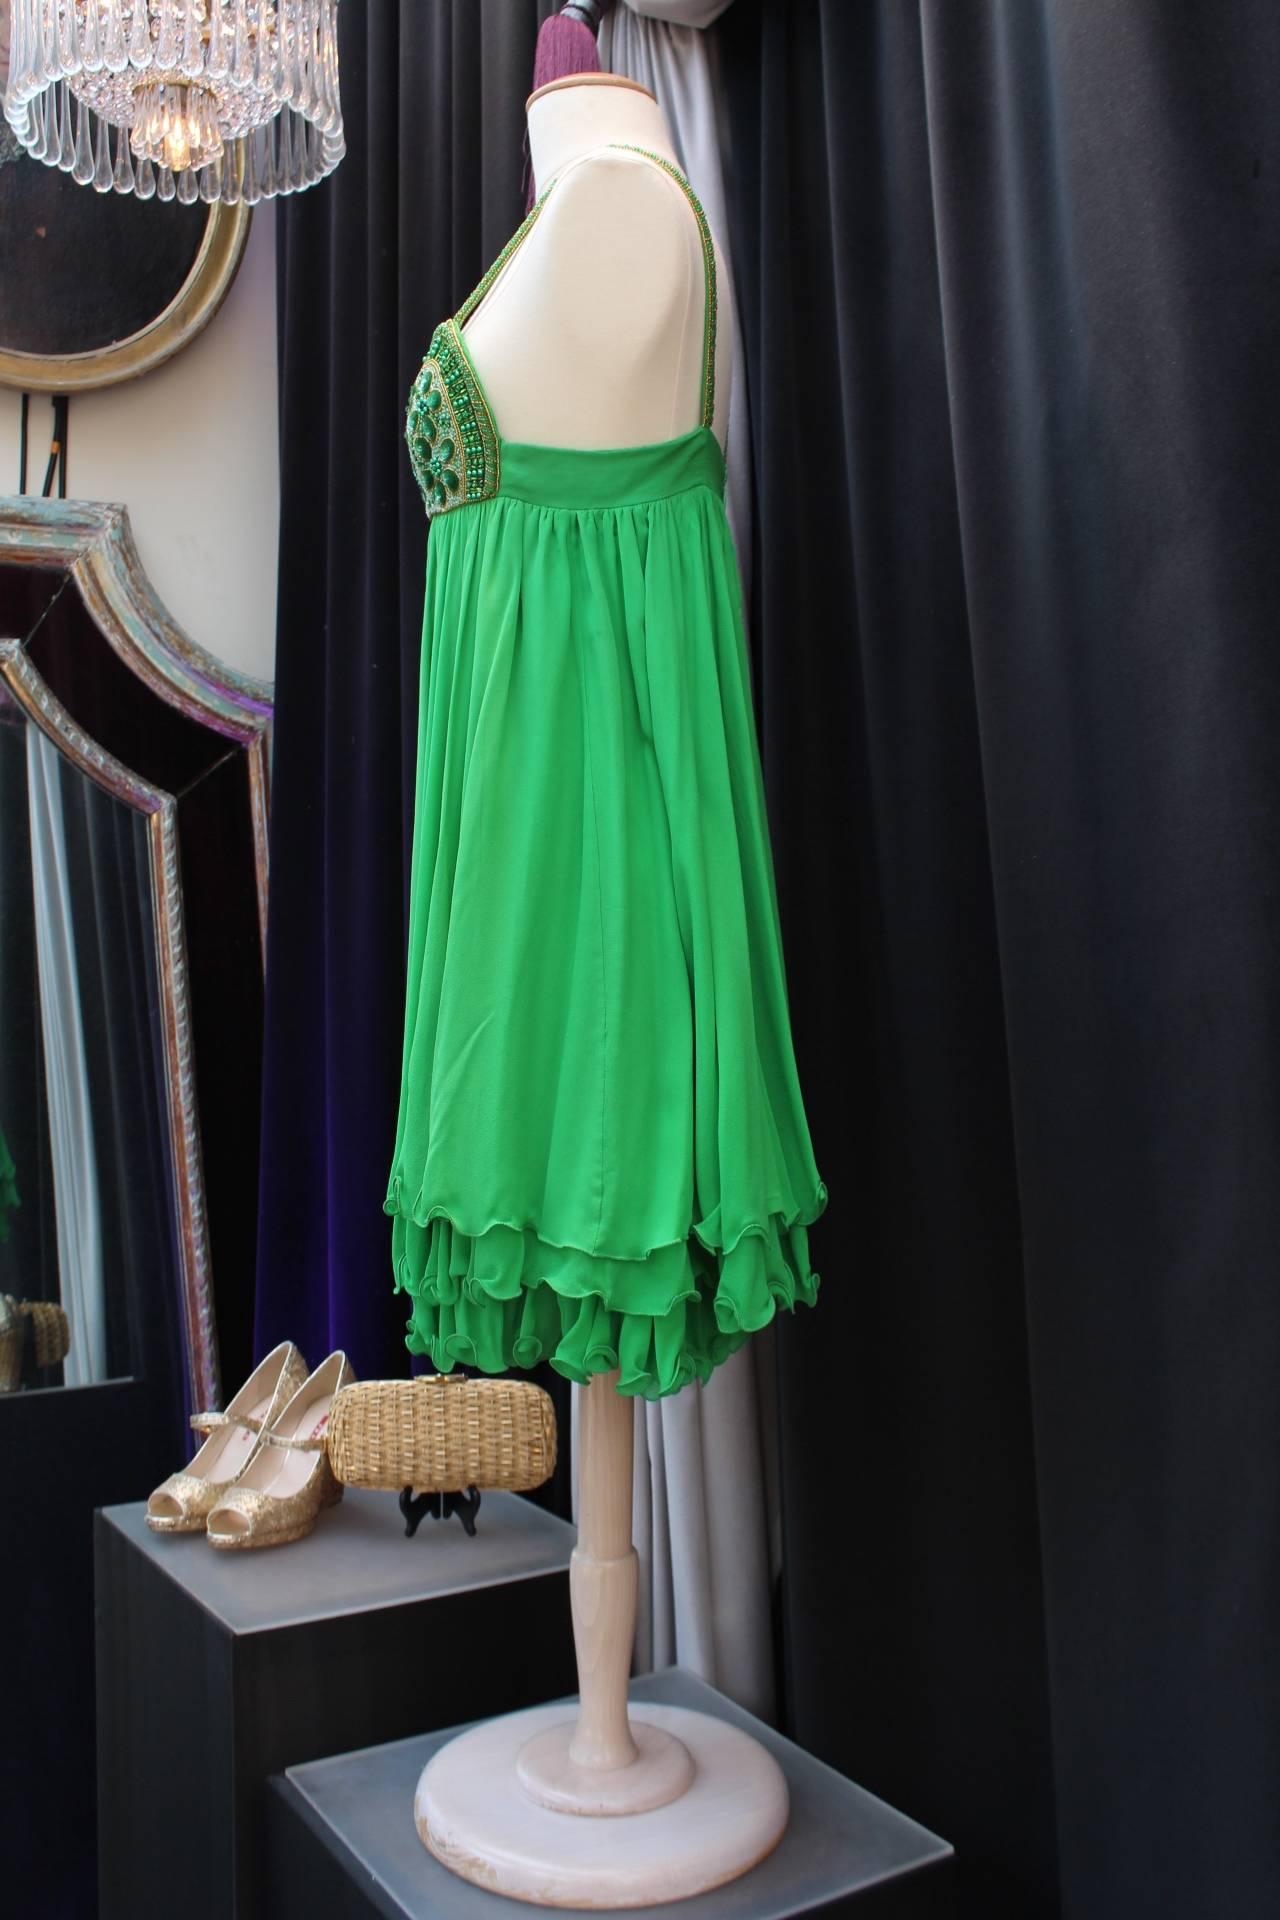 SERGE LEPAGE HAUTE COUTURE (Paris) Short skater dress with shoulder straps, green silk chiffon embroidered with seed beads and green and bronze sequins at bust.

Green silk lining.

Back zip closure.

Circa 1980.

Size 36 (US 4 S).

Length 92 cm (36